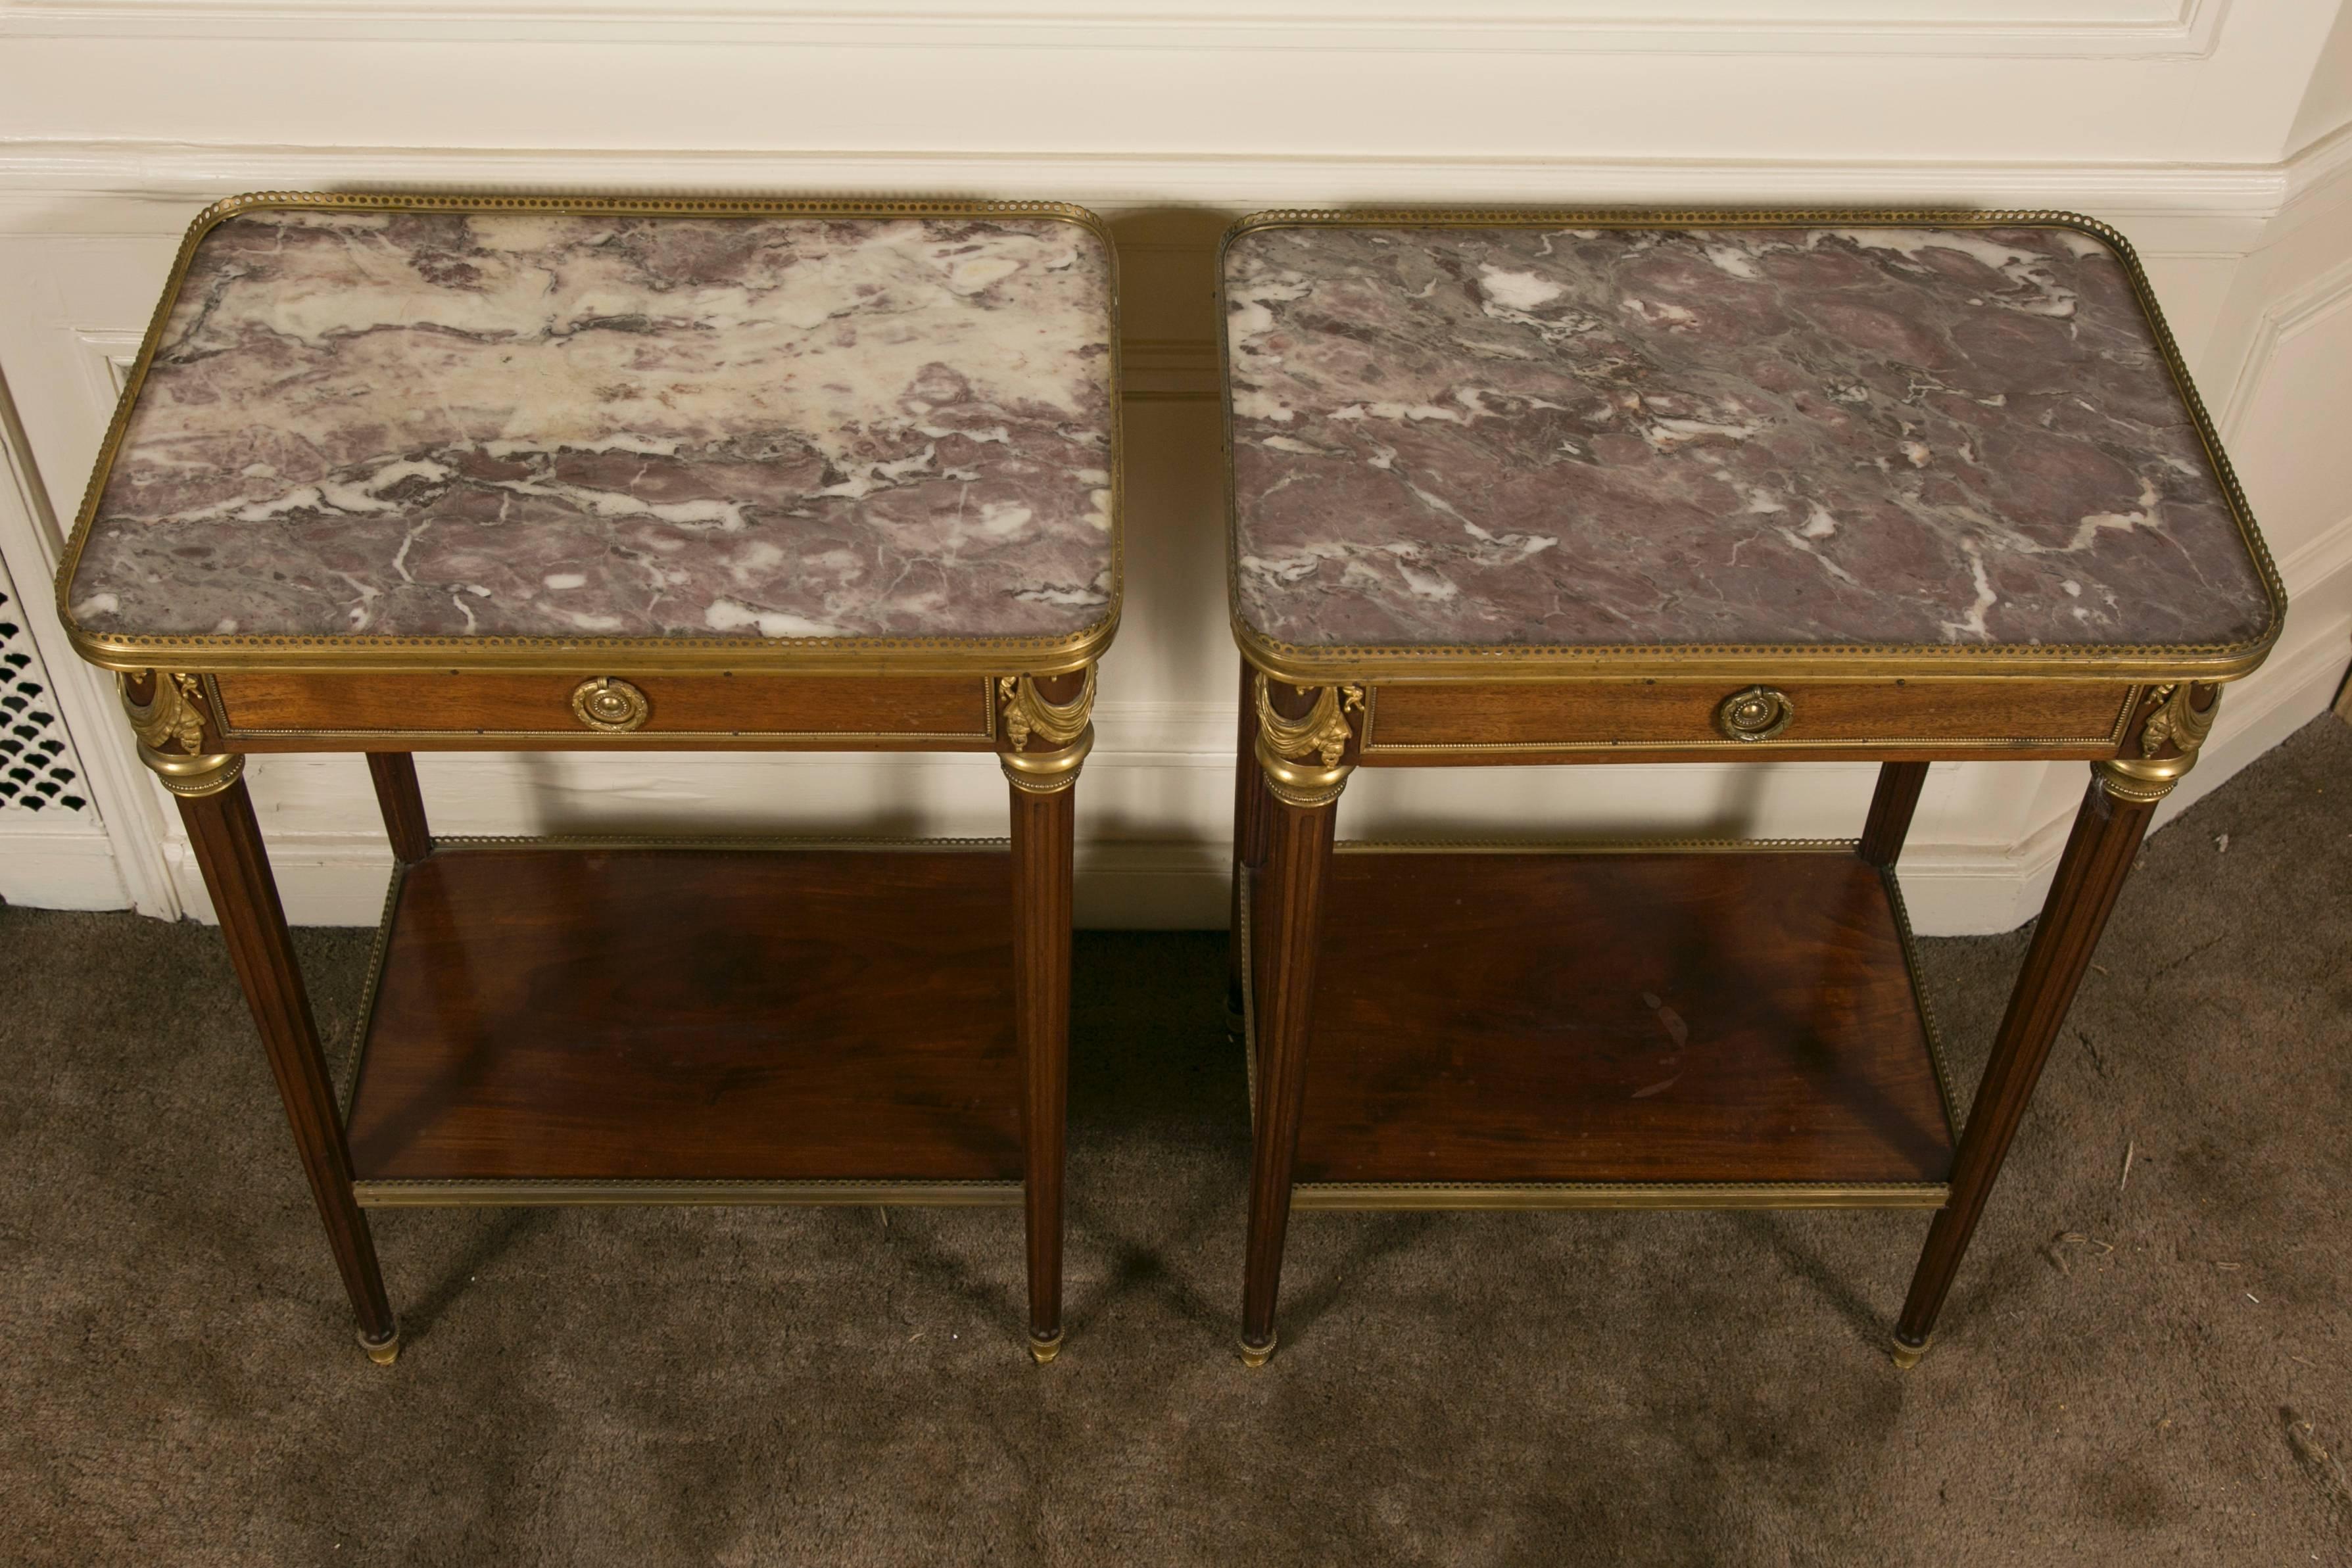 Very fine and elegant pair of French Louis XVI style mahogany side tables on four fluted legs ending with gilt bronze hooves, peach flower marble-top with lower shelf and one drawer. Chiselled gilt bronze trim around the marble-top and shelf. In the